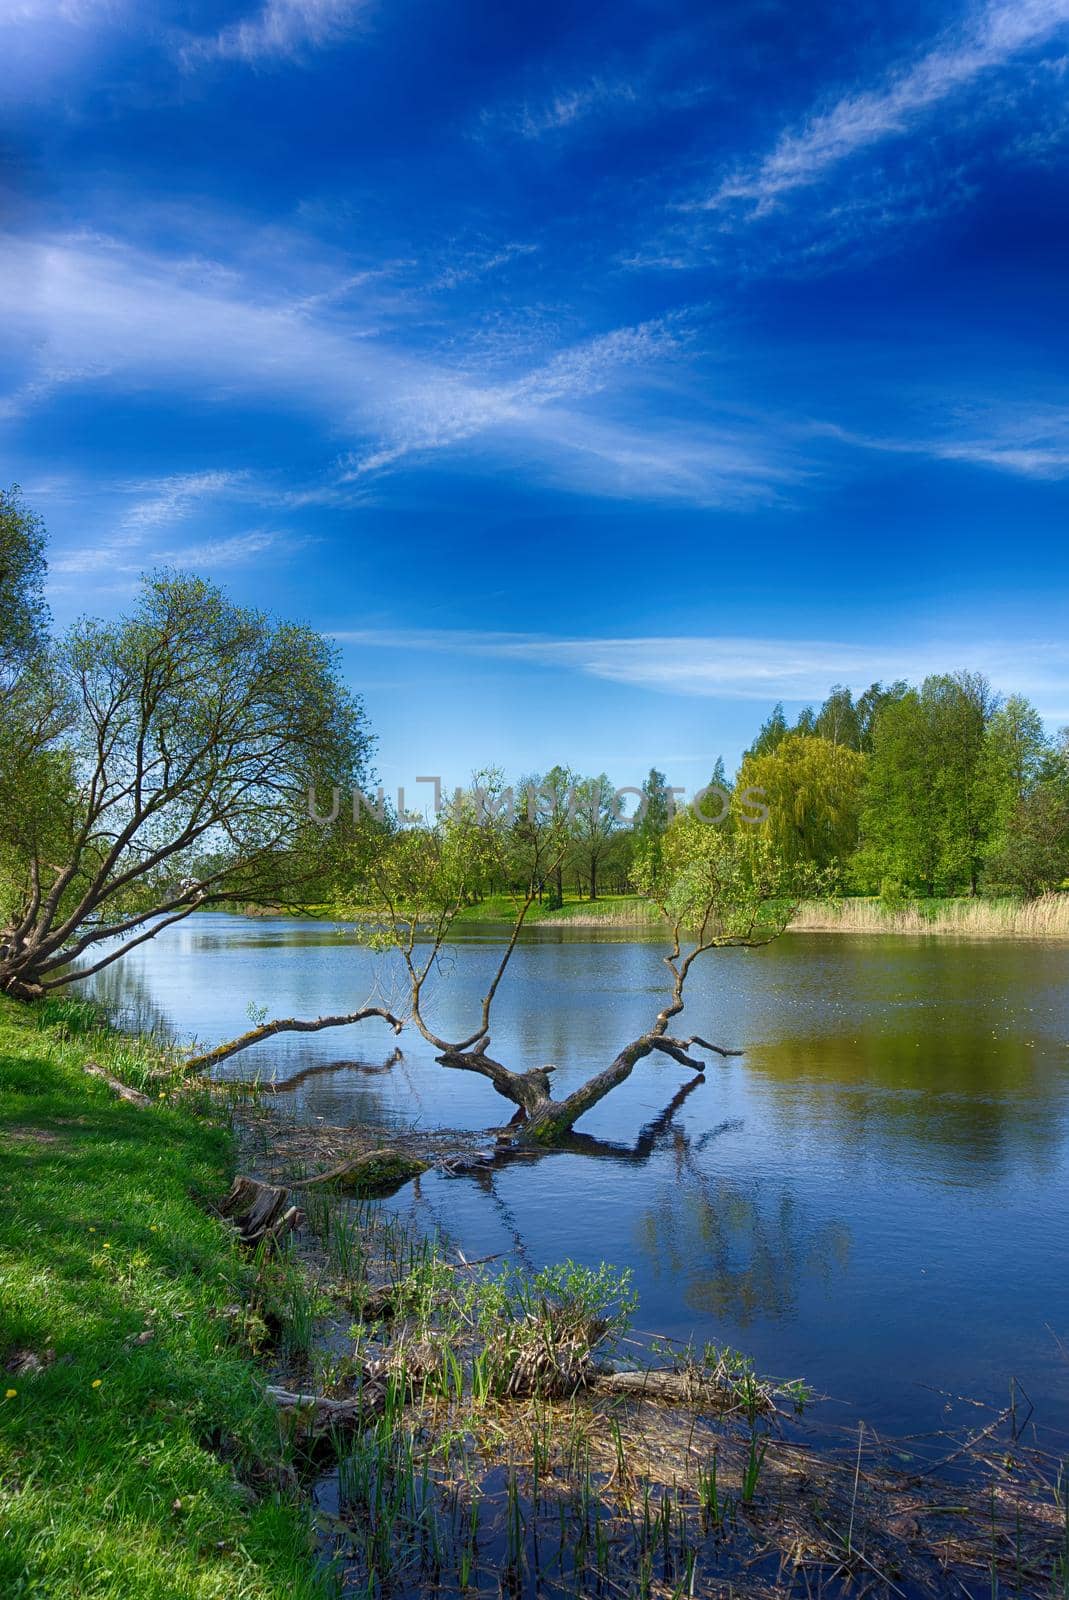 Old submerged tree in a tranquil river in spring with young green leaves on the trees and a sunny blue sky reflected in the water